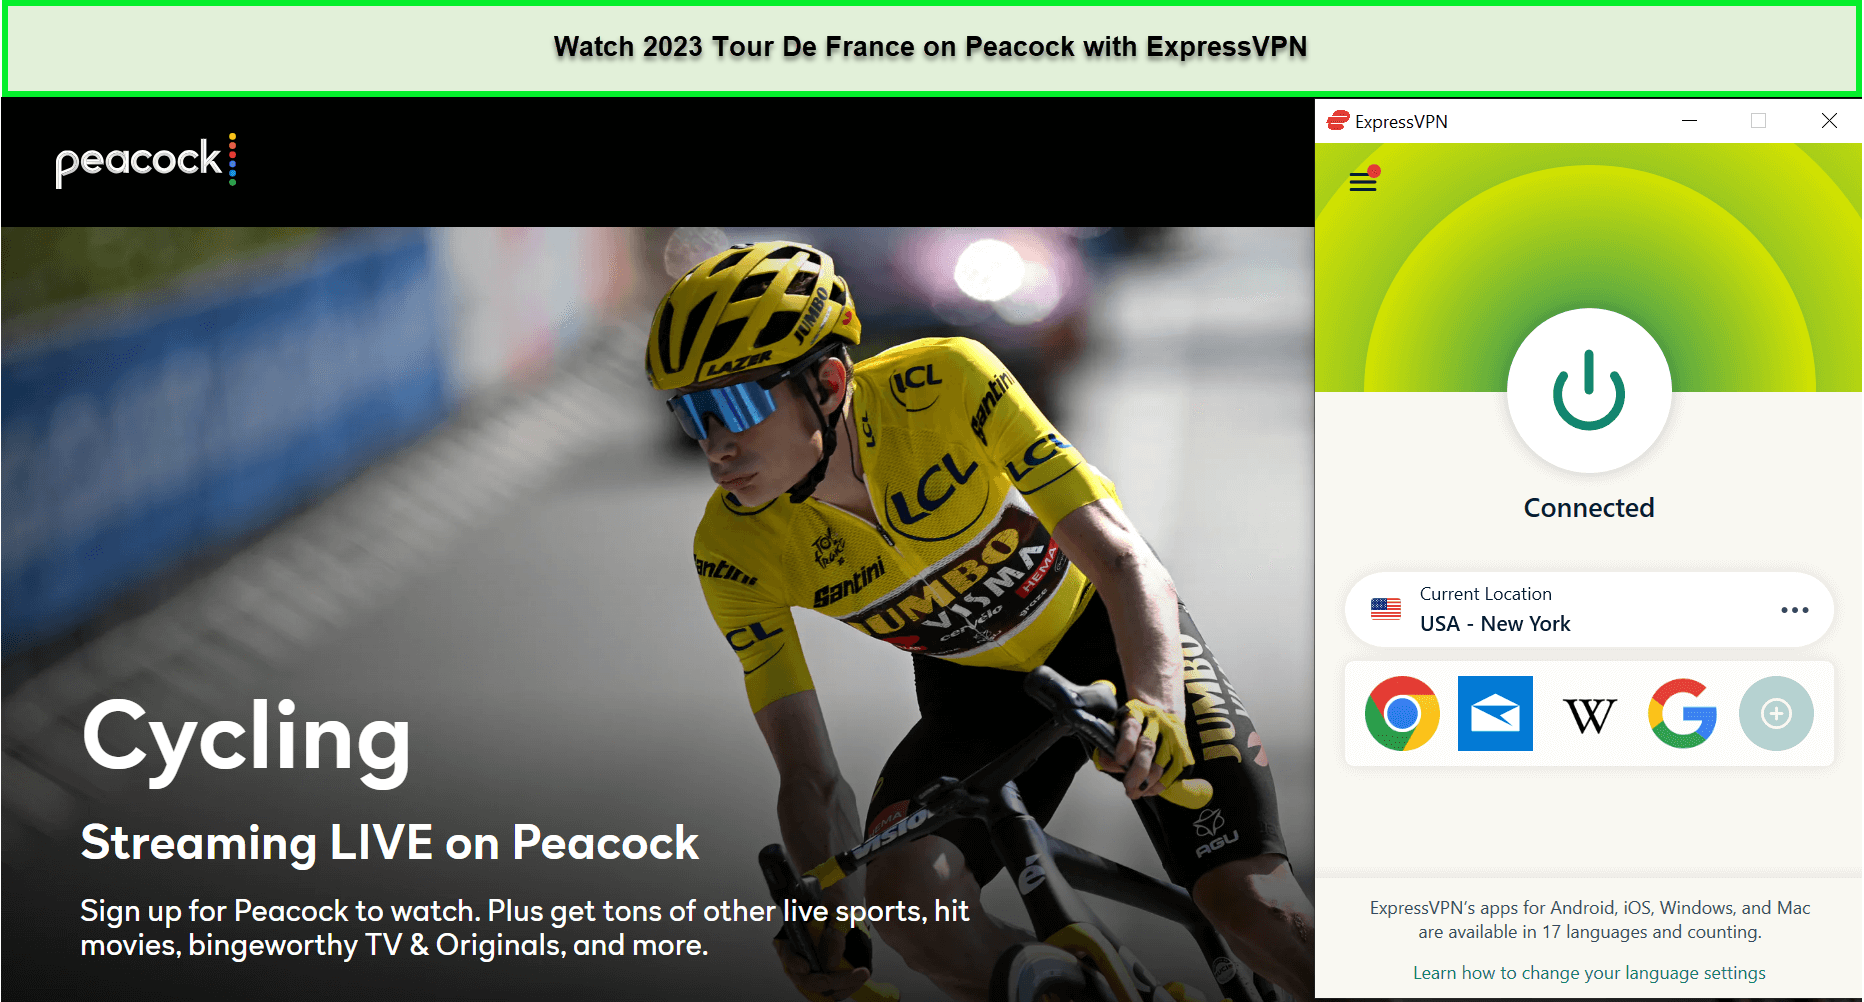 Watch-2023-Tour-De-France-in-UK-on-Peacock-with-ExpressVPN